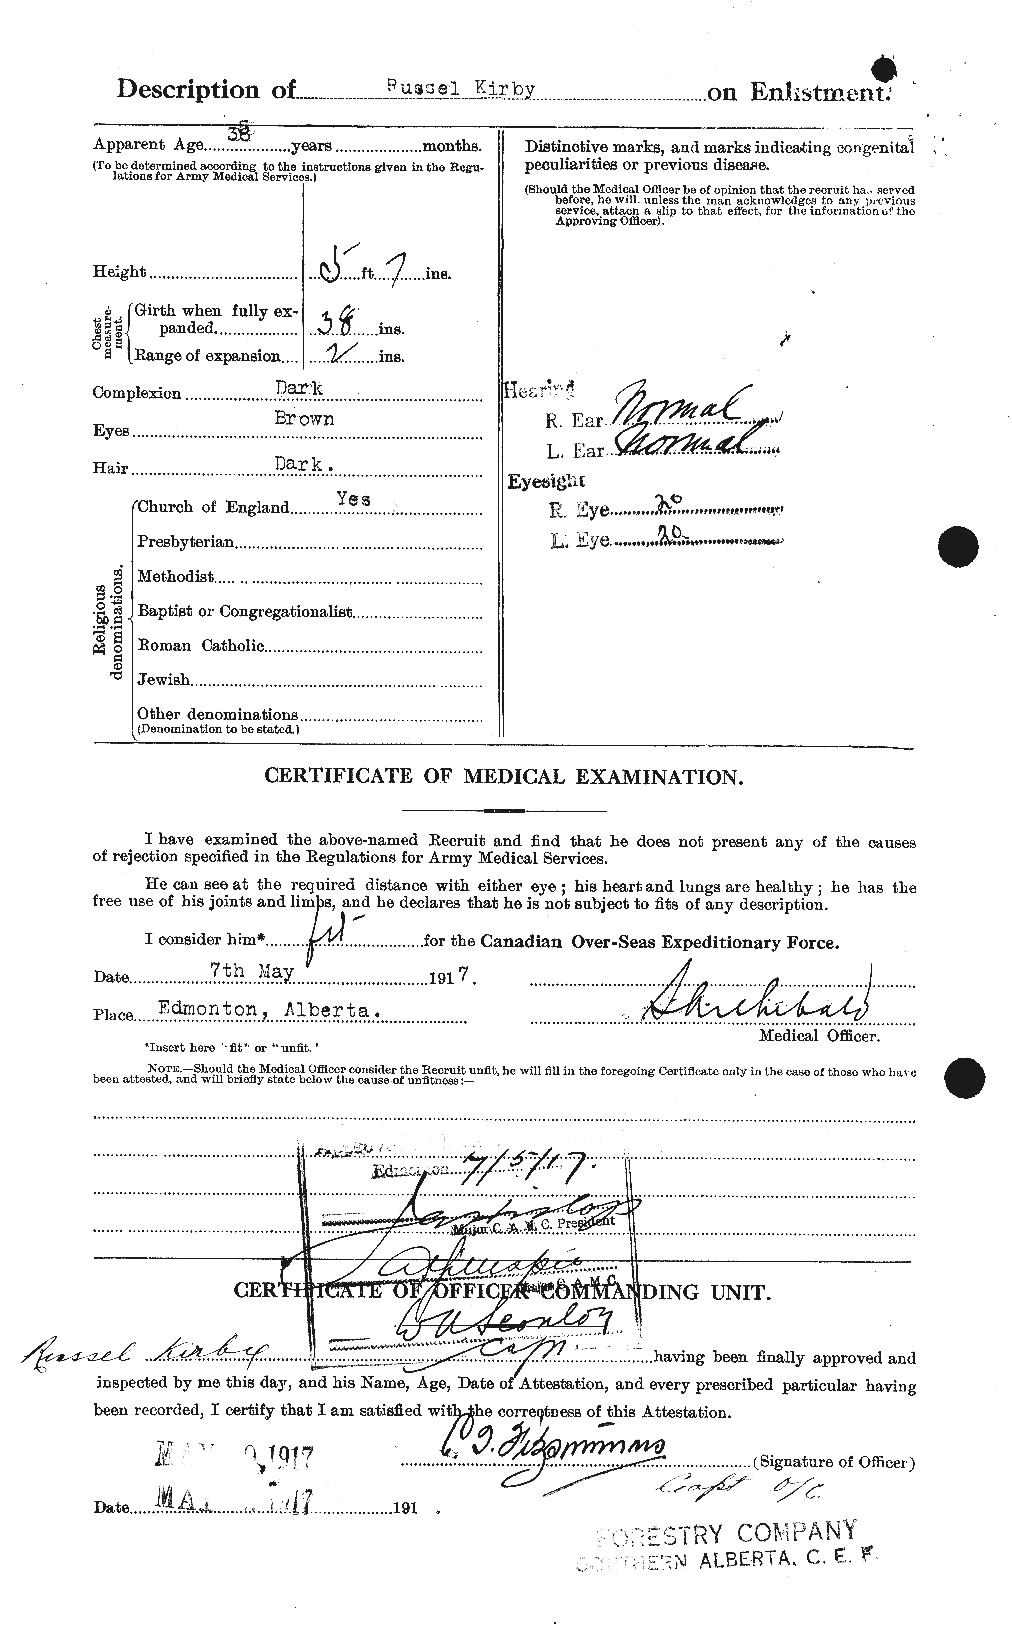 Personnel Records of the First World War - CEF 437271b